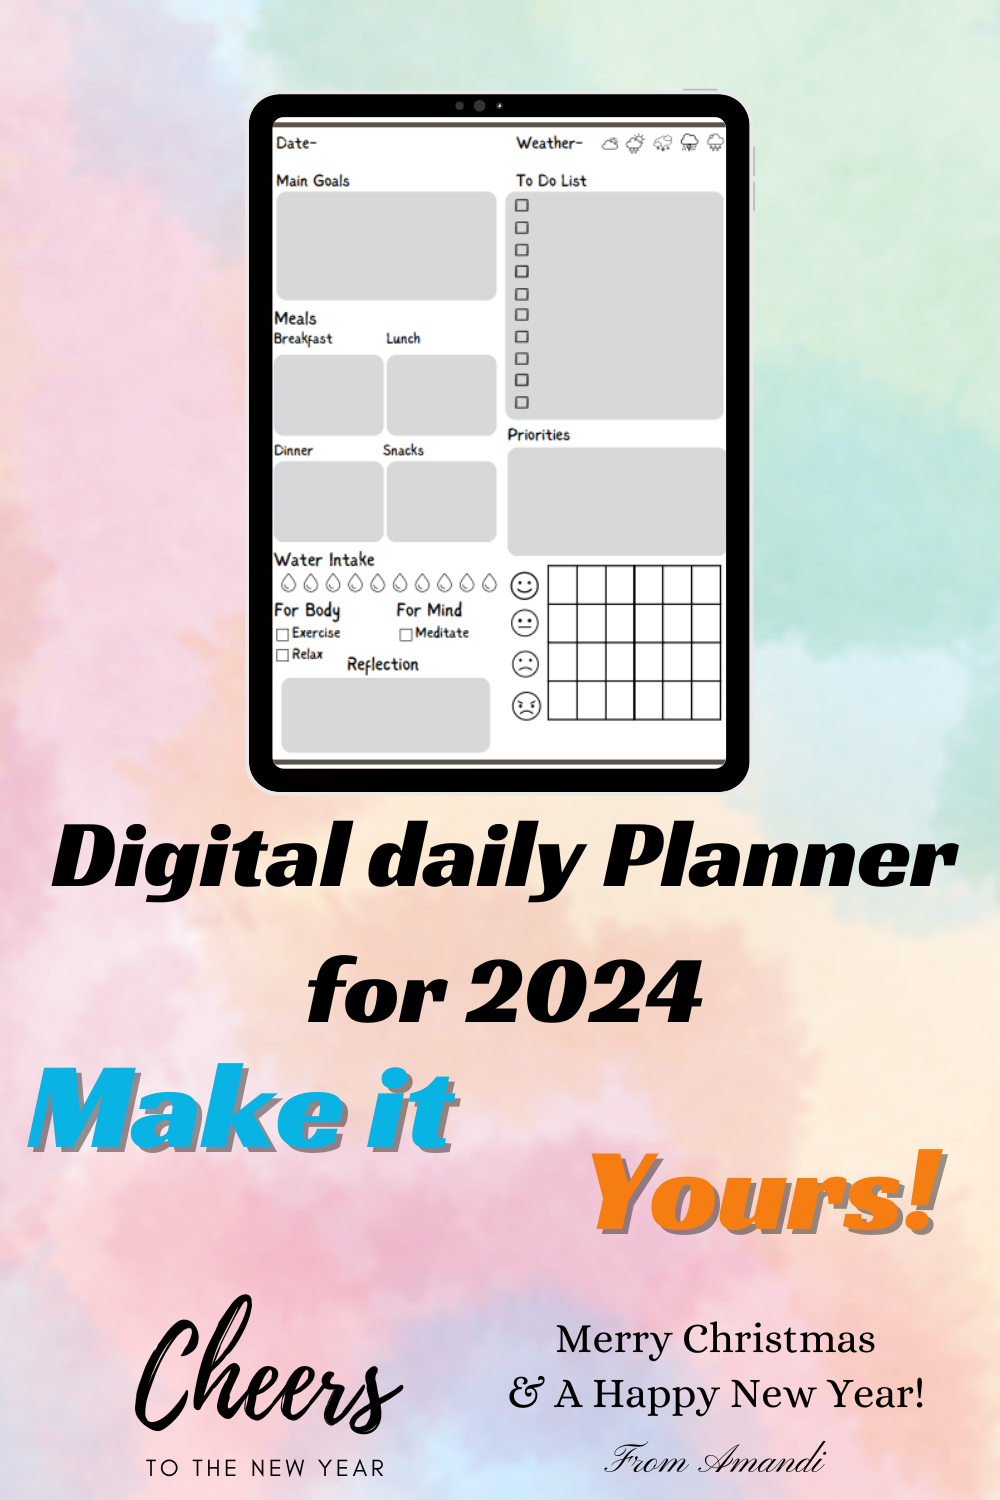 Digital Daily Planner 2024 pinterest preview image.